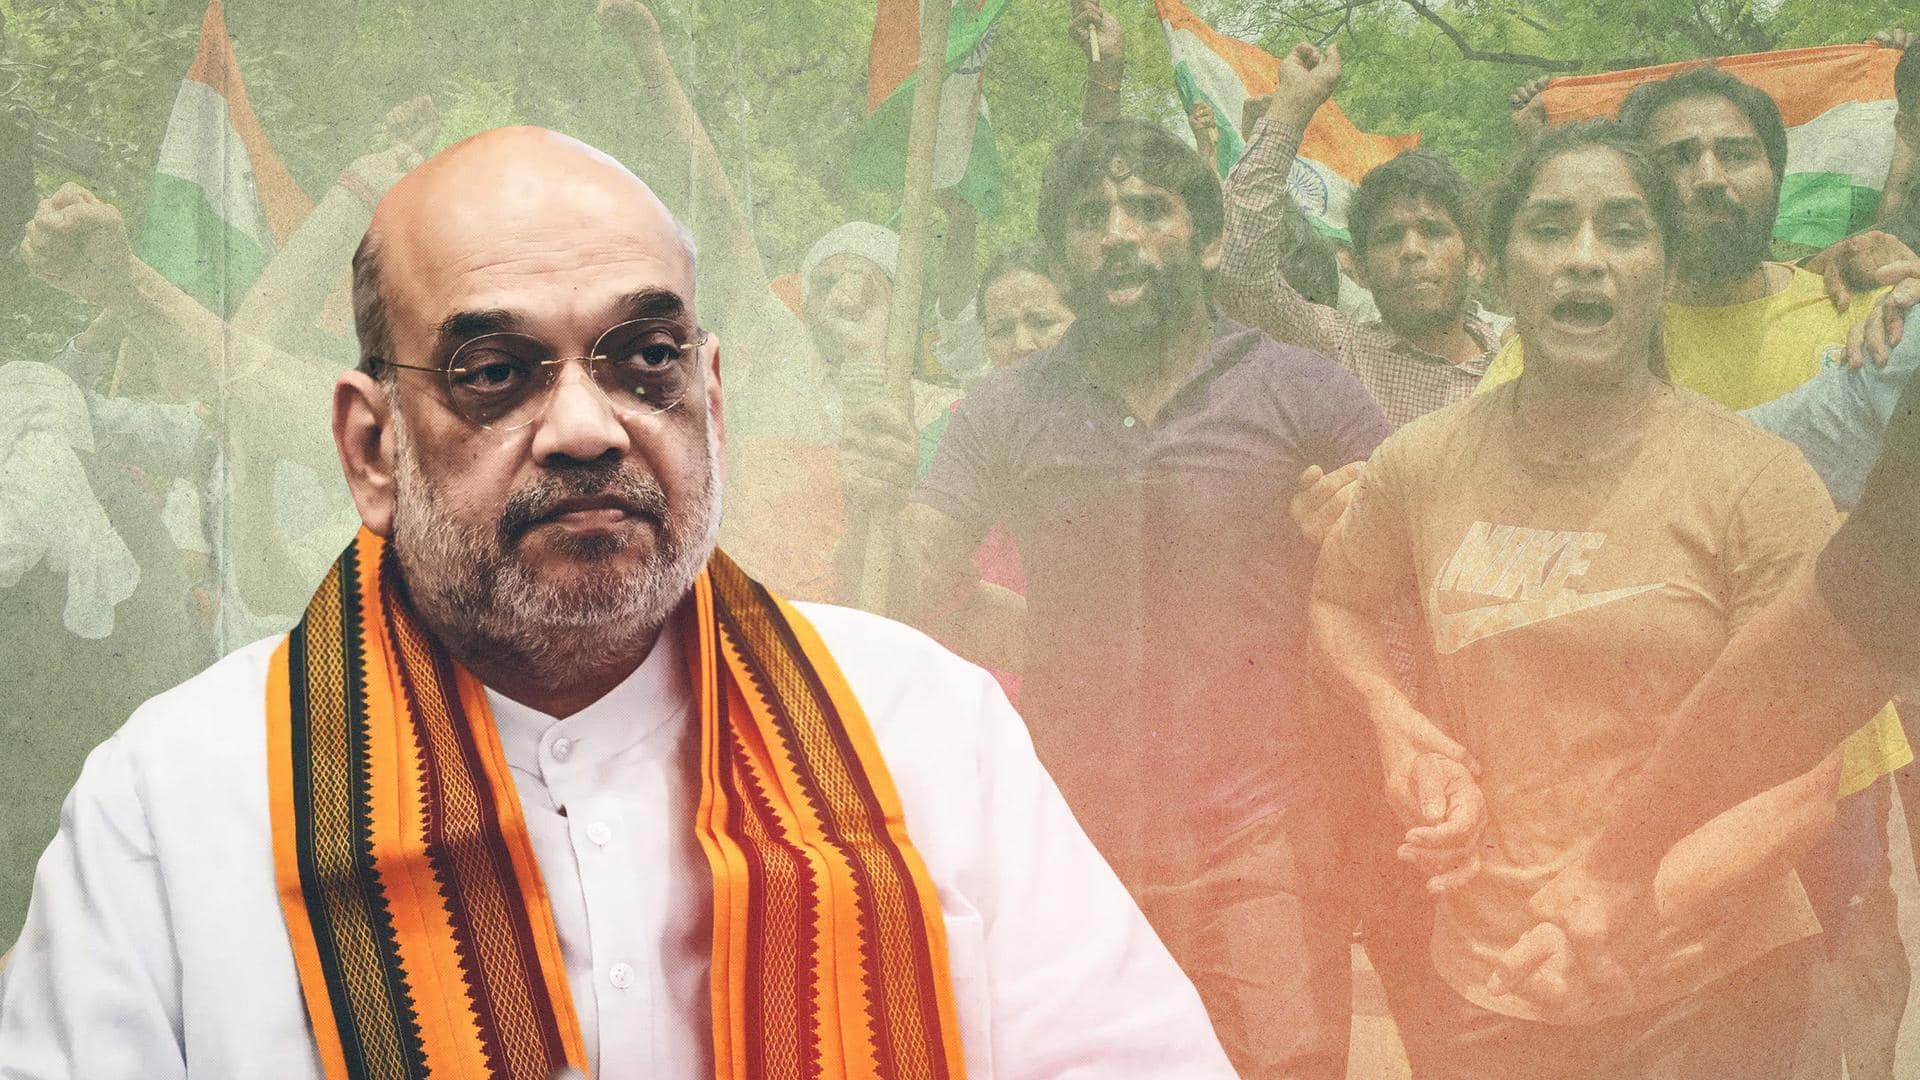 Protesting wrestlers met Amit Shah last week, shared concerns: Report